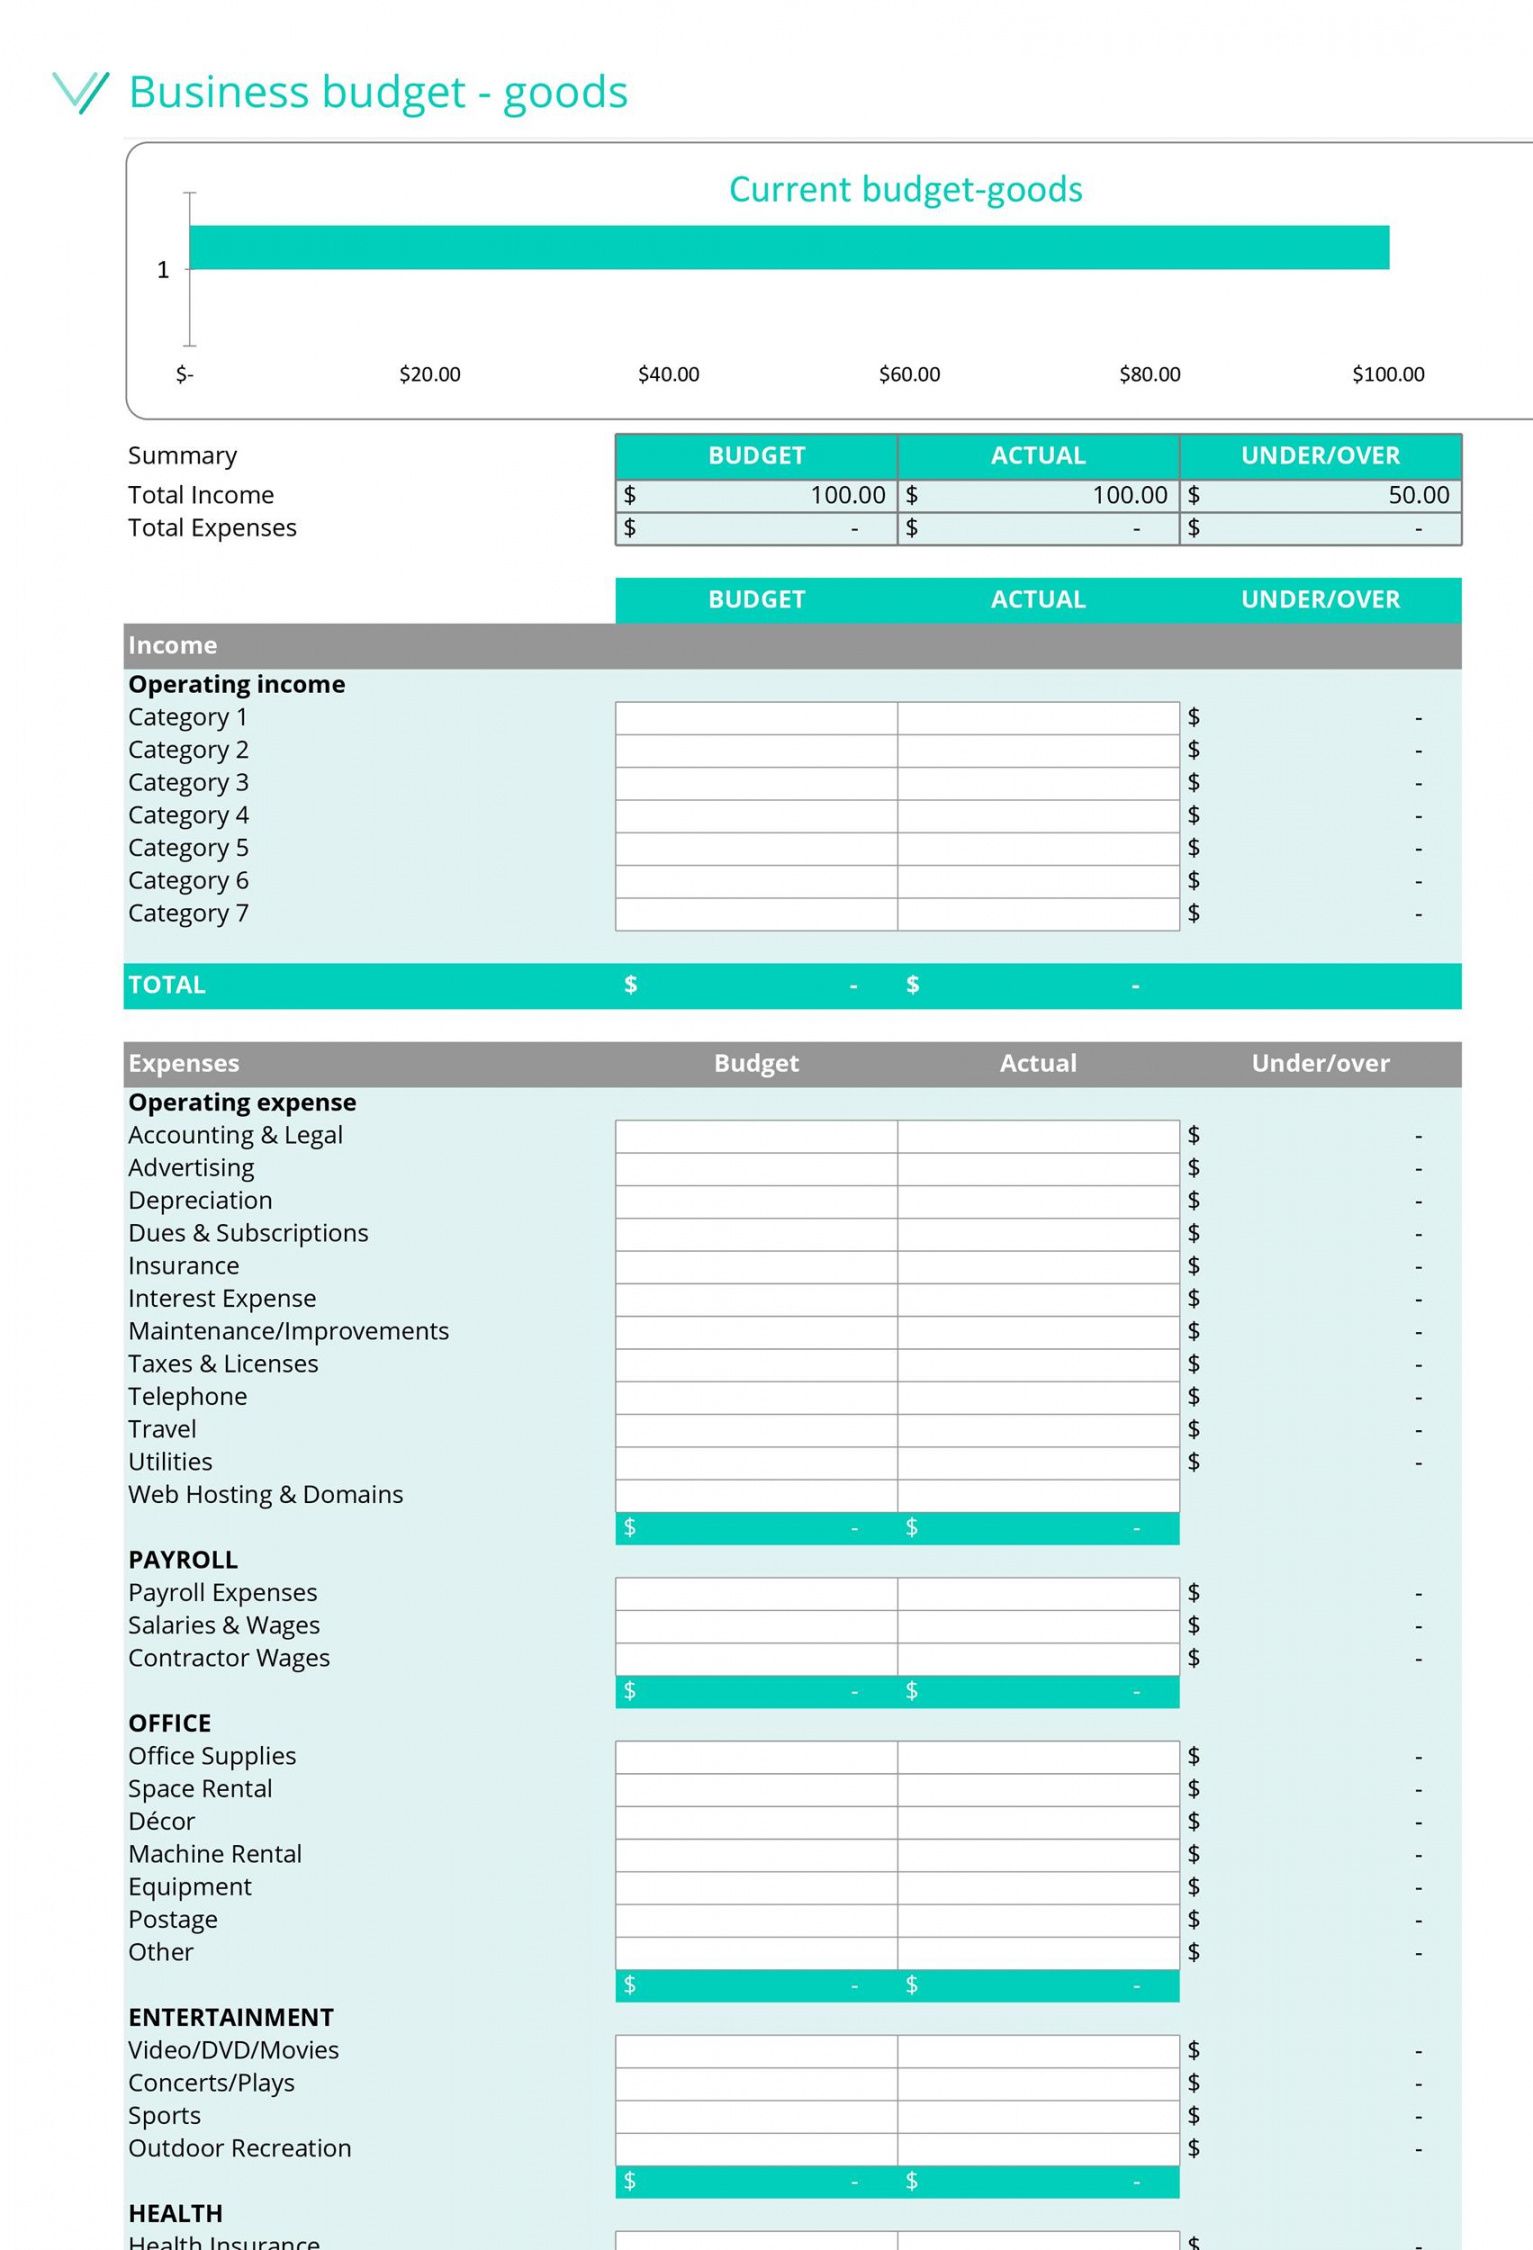 37-handy-business-budget-templates-excel-google-sheets-employee-engagement-budget-template